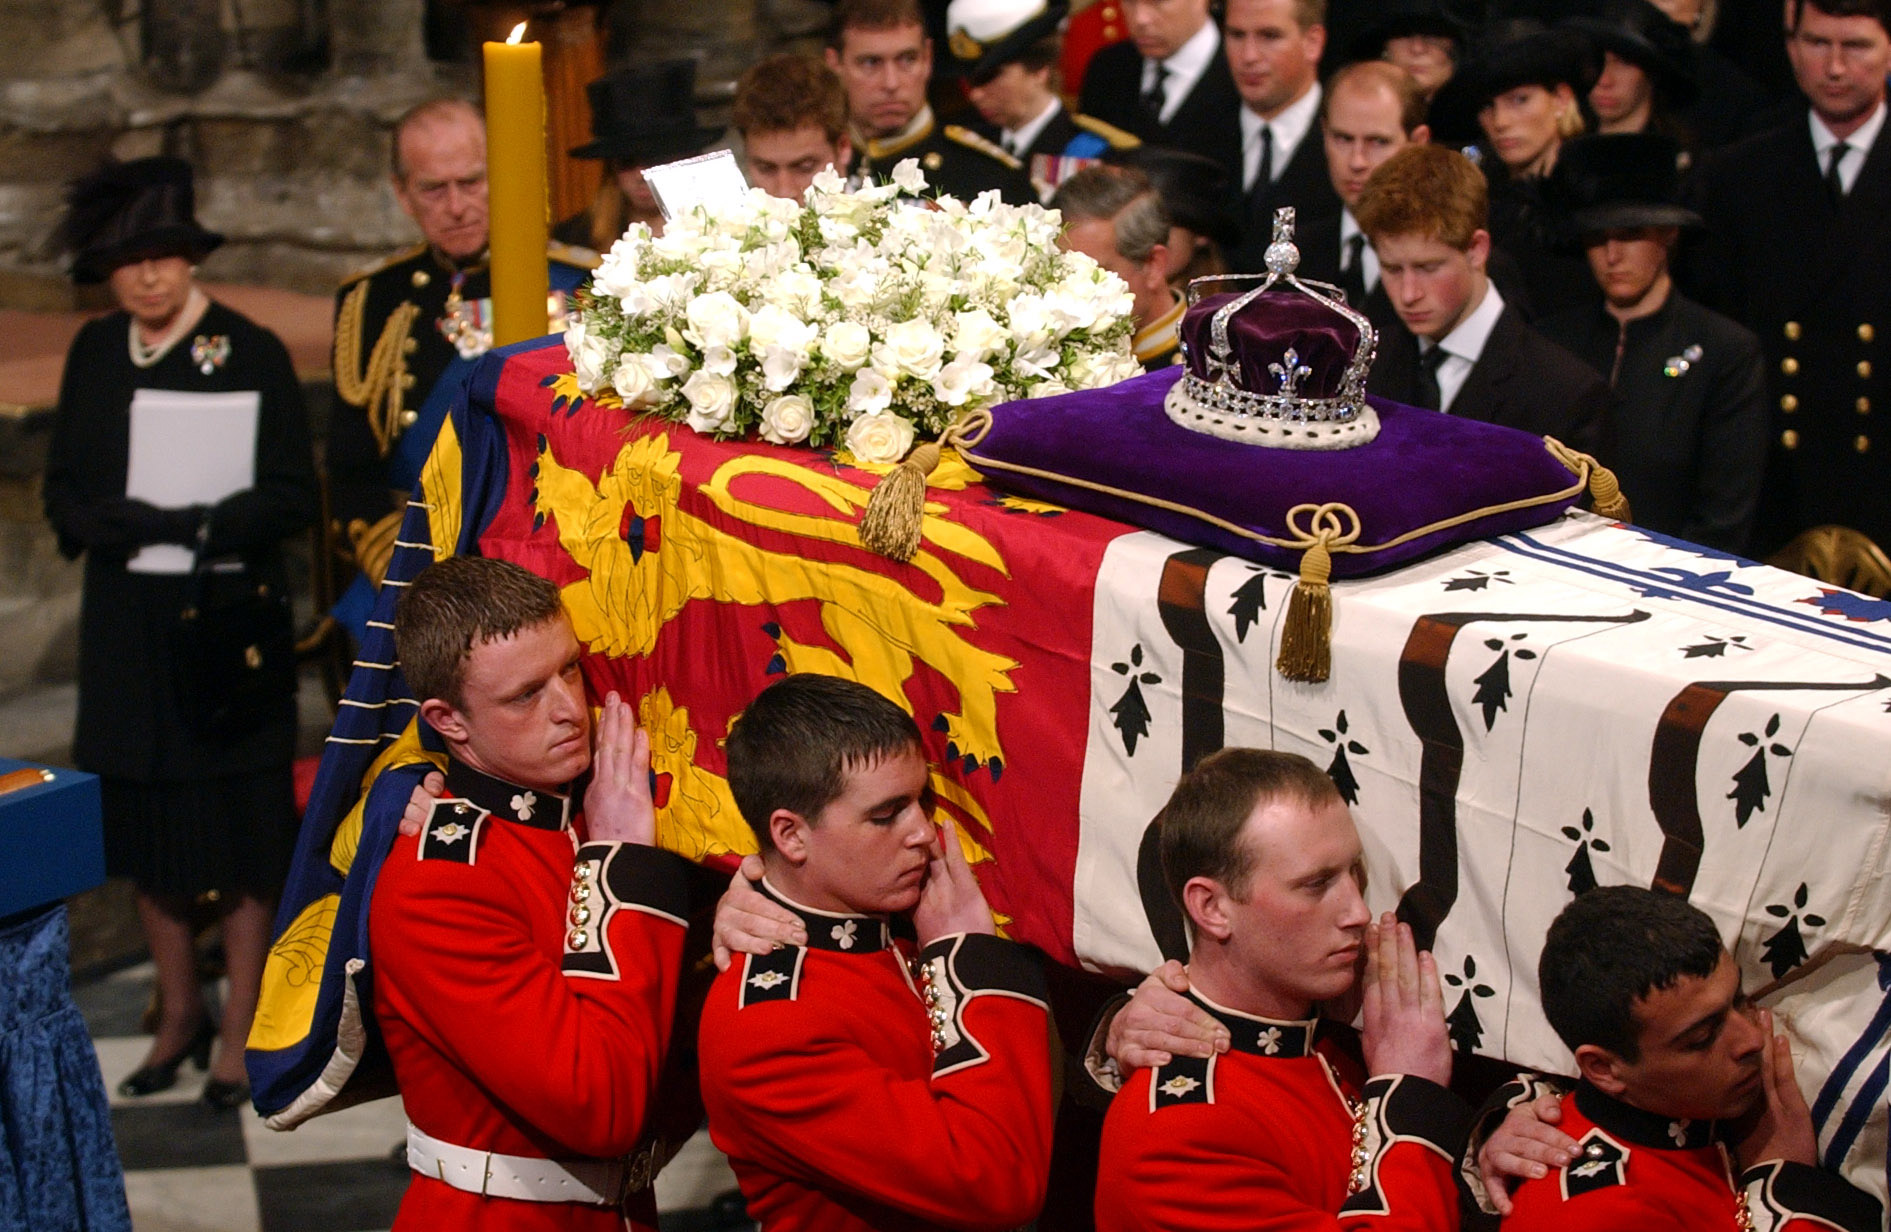 <p>Queen Elizabeth II, Prince Philip and other members of the royal family watched as the coffin of Queen Elizabeth the Queen Mother was prepared to be carried from Westminster Abbey at the conclusion of her funeral service on April 9, 2002. </p><p>Atop the casket was a handwritten note from her daughter, the monarch, that read "In loving memory" and was signed "Lilibet" -- the late queen consort's nickname for her first-born child, who was by her bedside when she passed at 101.</p>